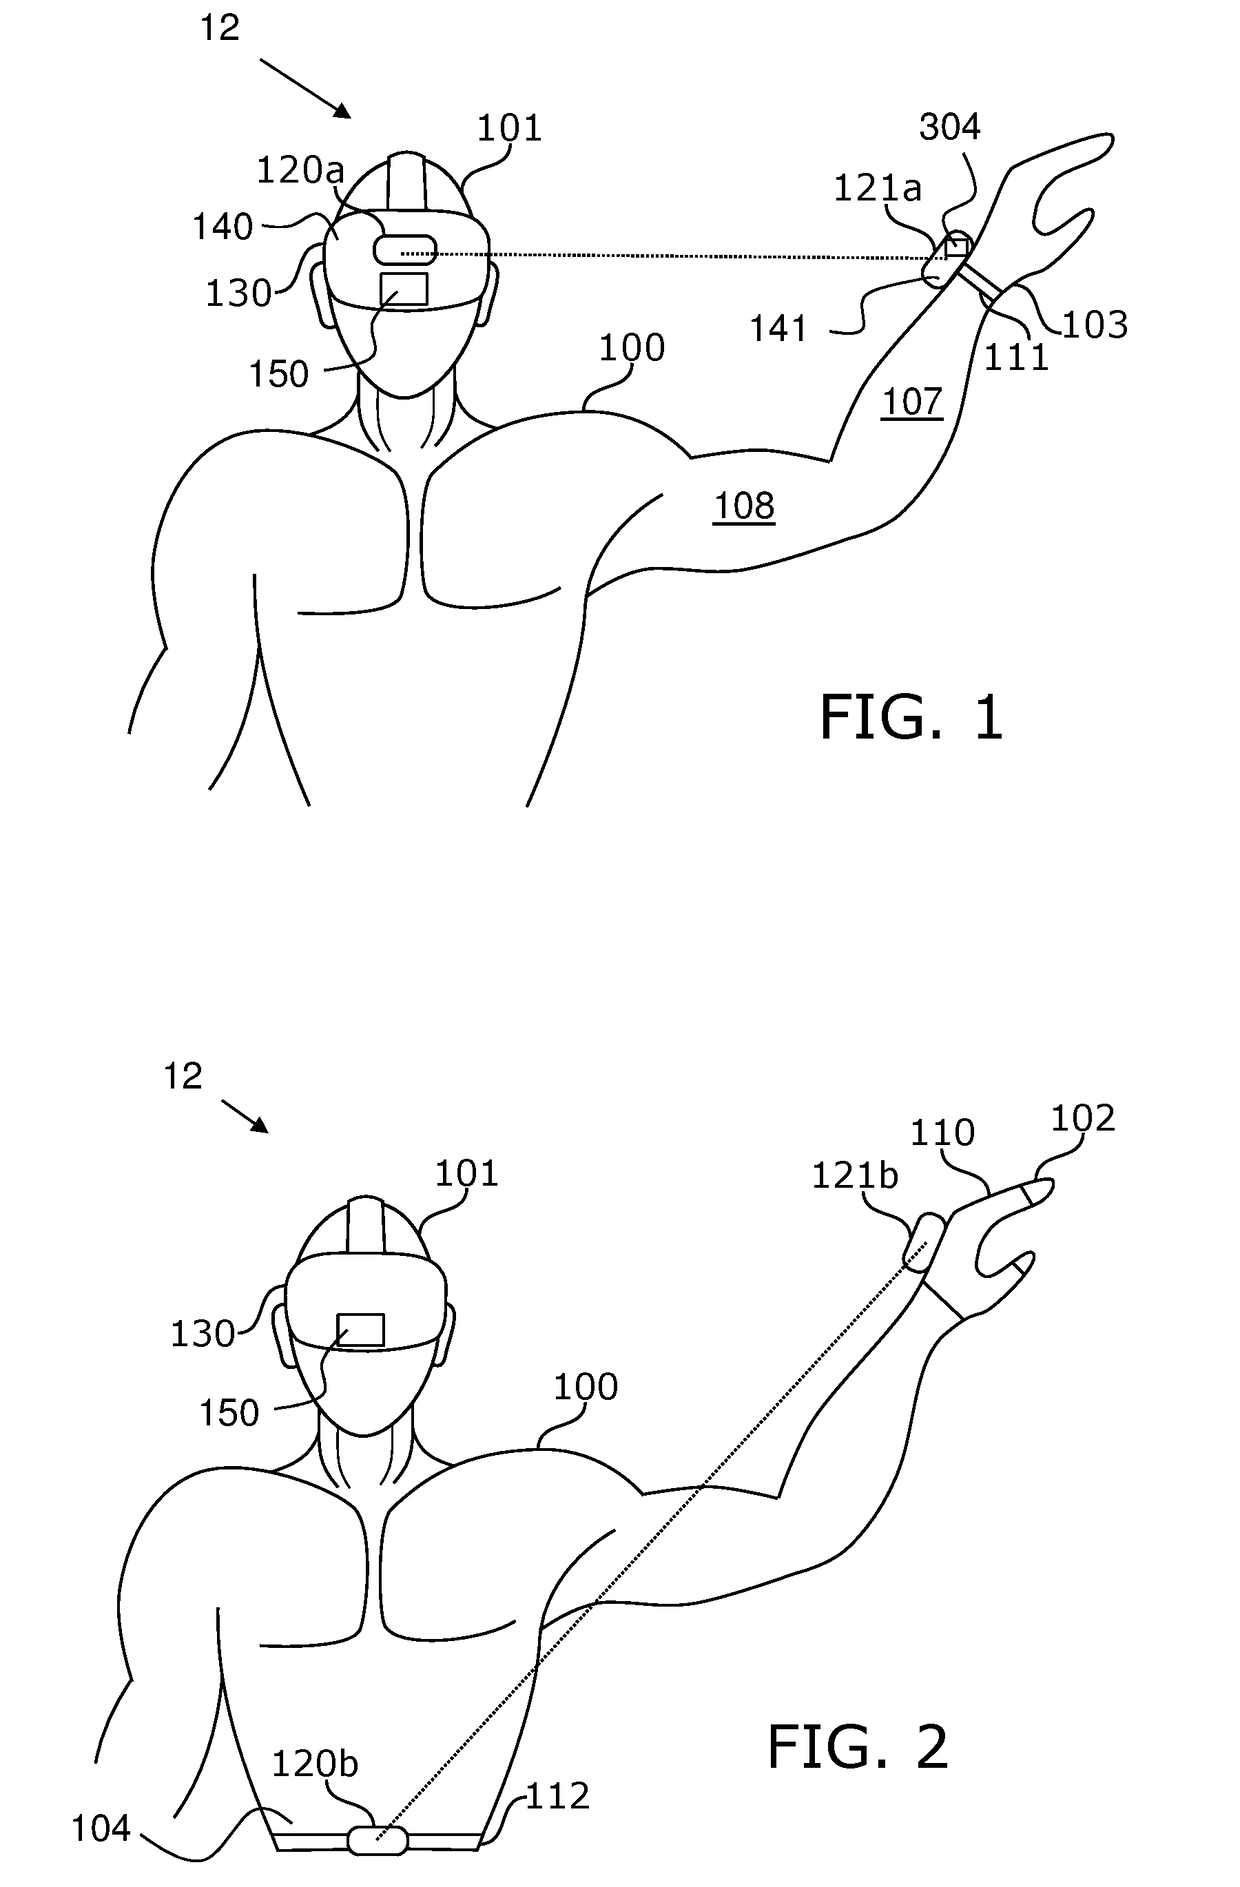 Wearable motion tracking system